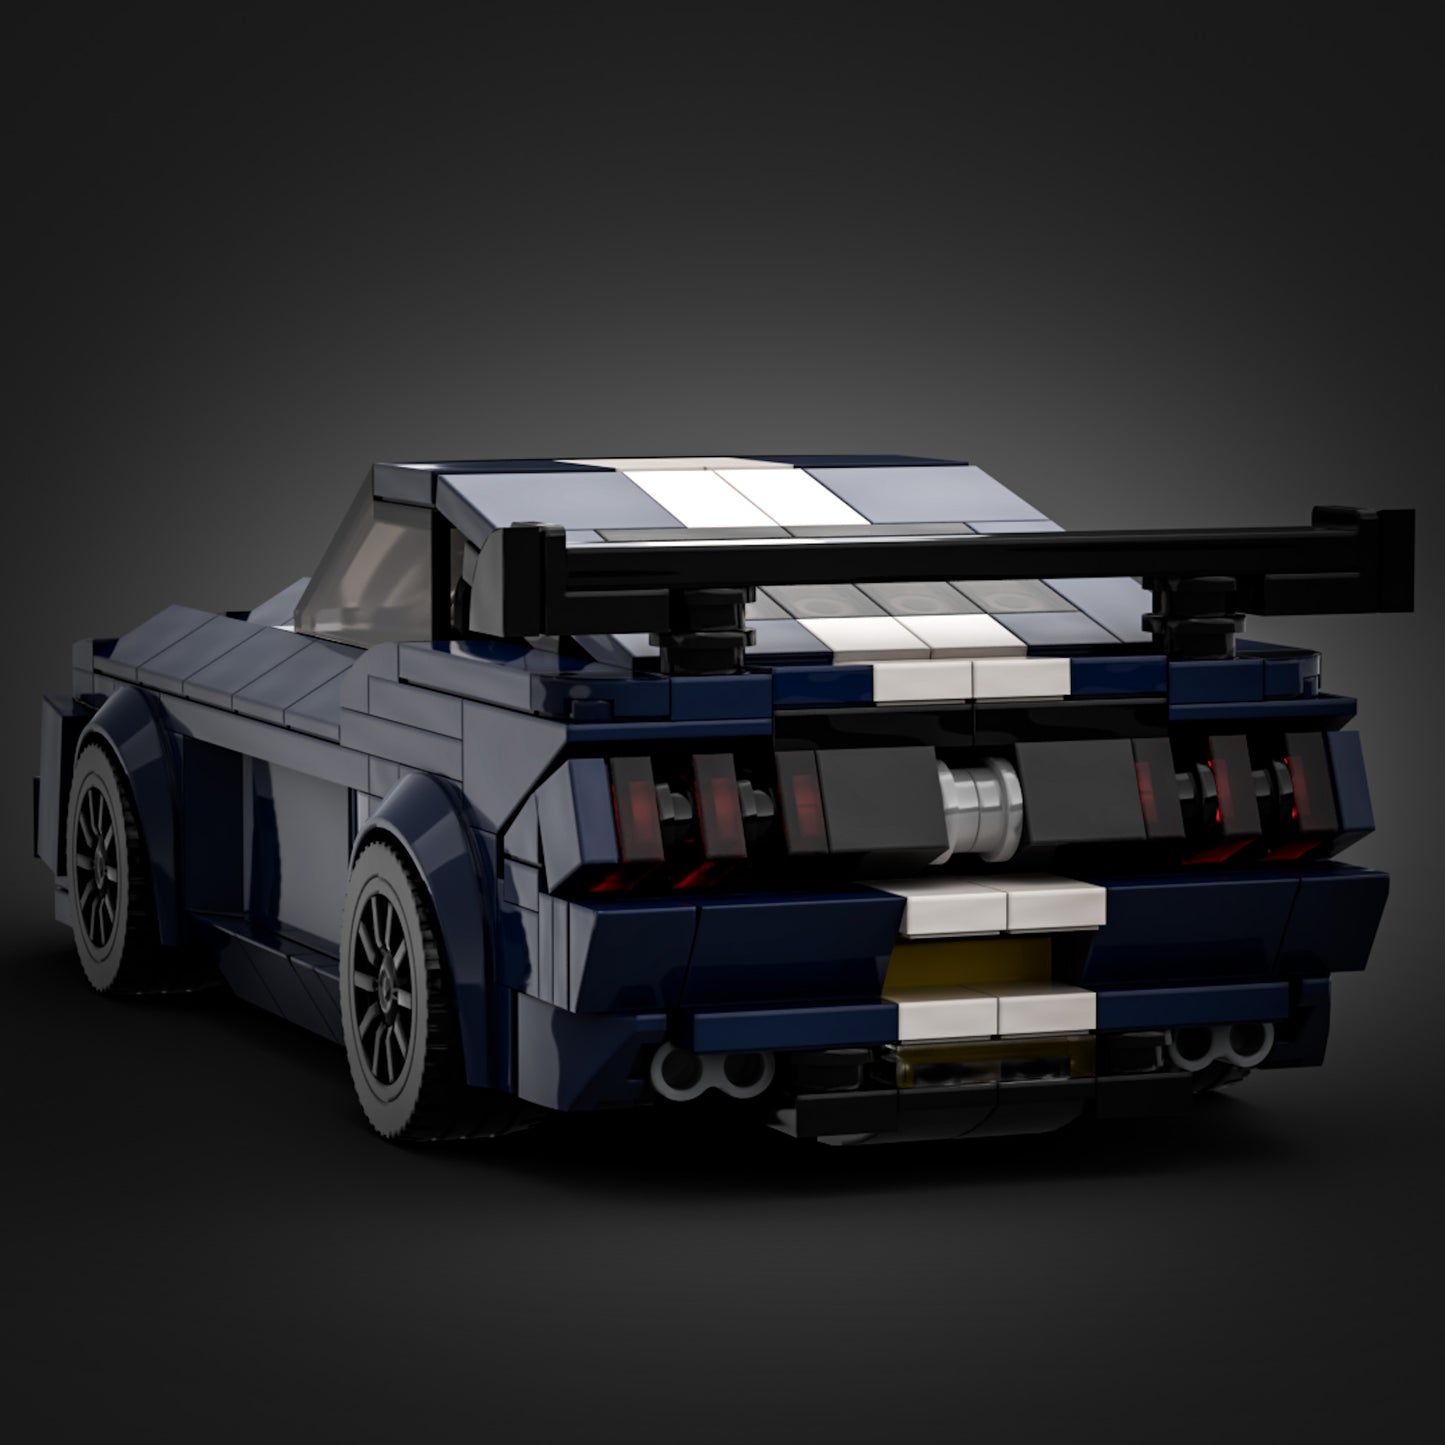 Inspired by Ford Mustang Shelby GT500 - Dark Blue (instructions)